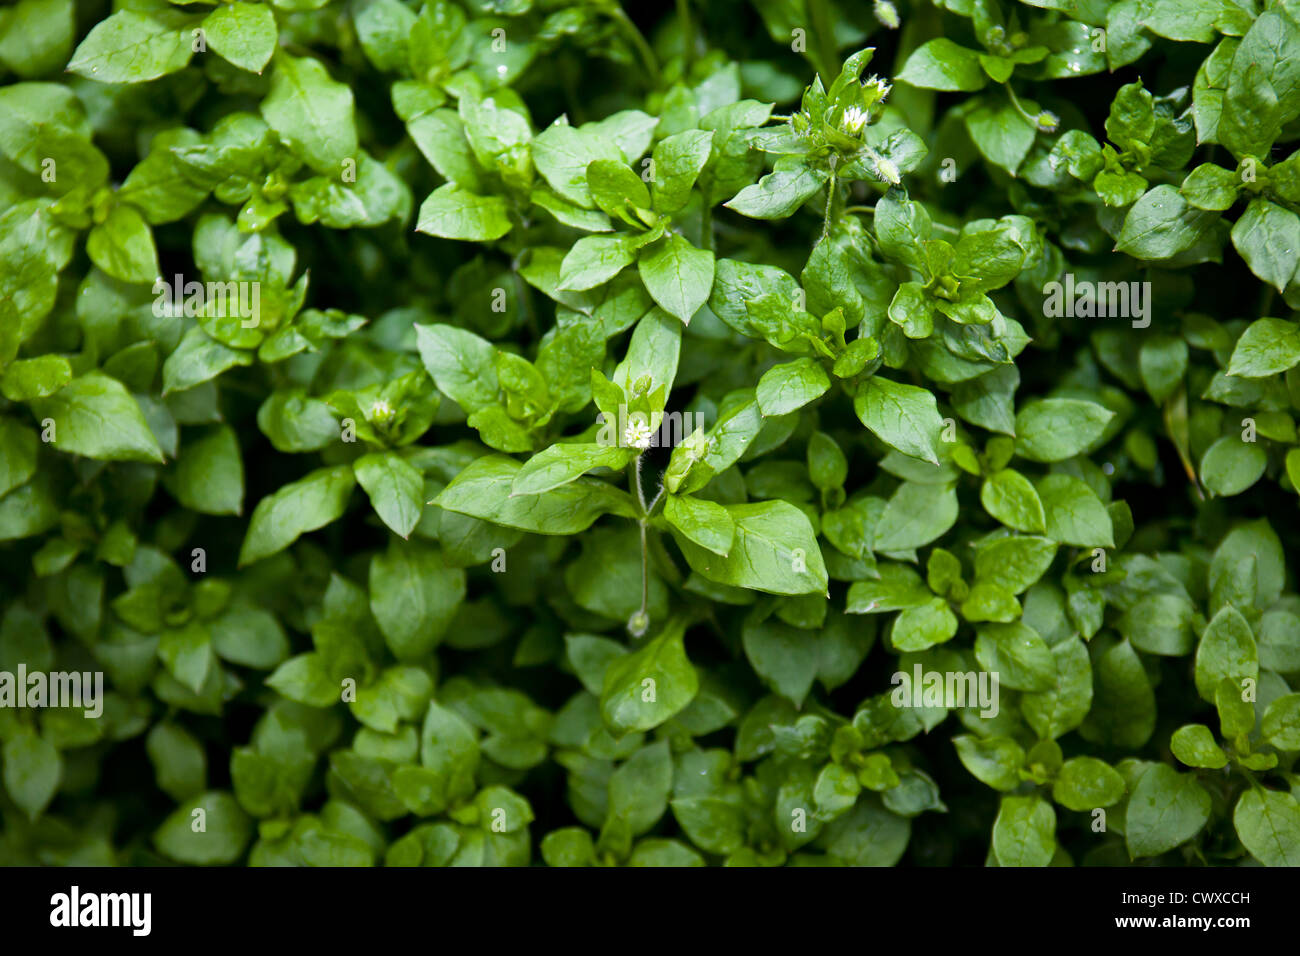 Common Chickweed: (Stellaria media): Can be used in sandwiches and salads - like alfalfa. Stock Photo